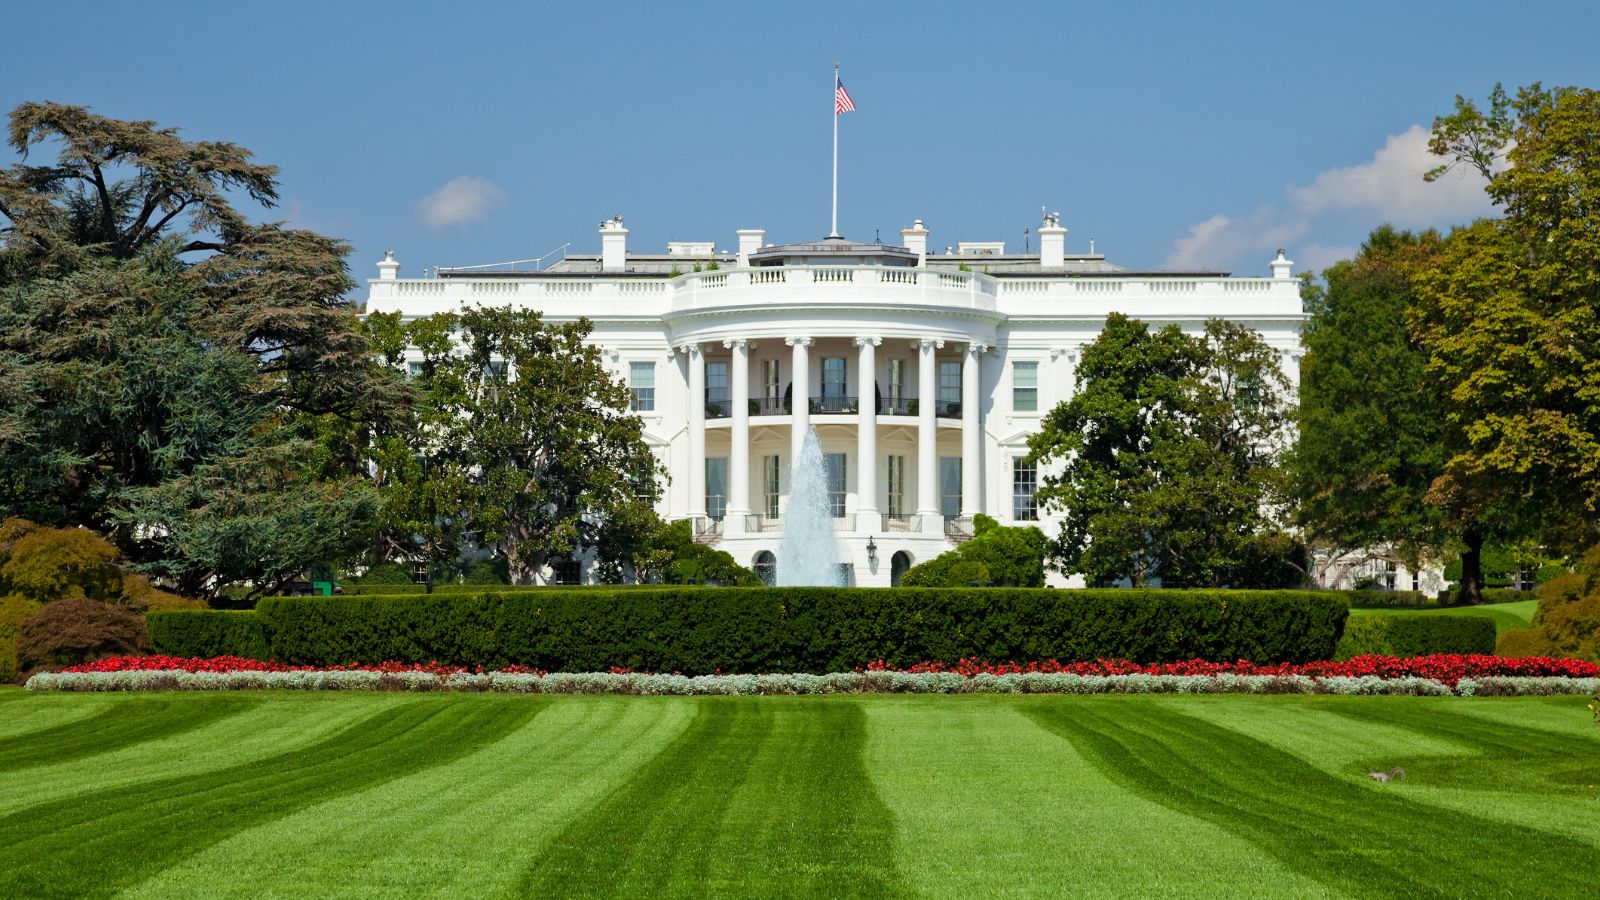 <p>Recommended by 60% of visitors</p><p>The White House, the US President’s residence and office, is a historic landmark in Washington, DC. Chosen by George Washington and designed by James Hoban, The White House is one of the oldest public buildings in the capital. It houses 132 rooms filled with fine arts and serves as a museum of American history. Public tours on specific days offer a glimpse into this iconic structure. The White House Garden, featuring the Jacqueline Kennedy Garden and Rose Garden, opens to the public occasionally, adding to the allure of this must-visit destination.</p>